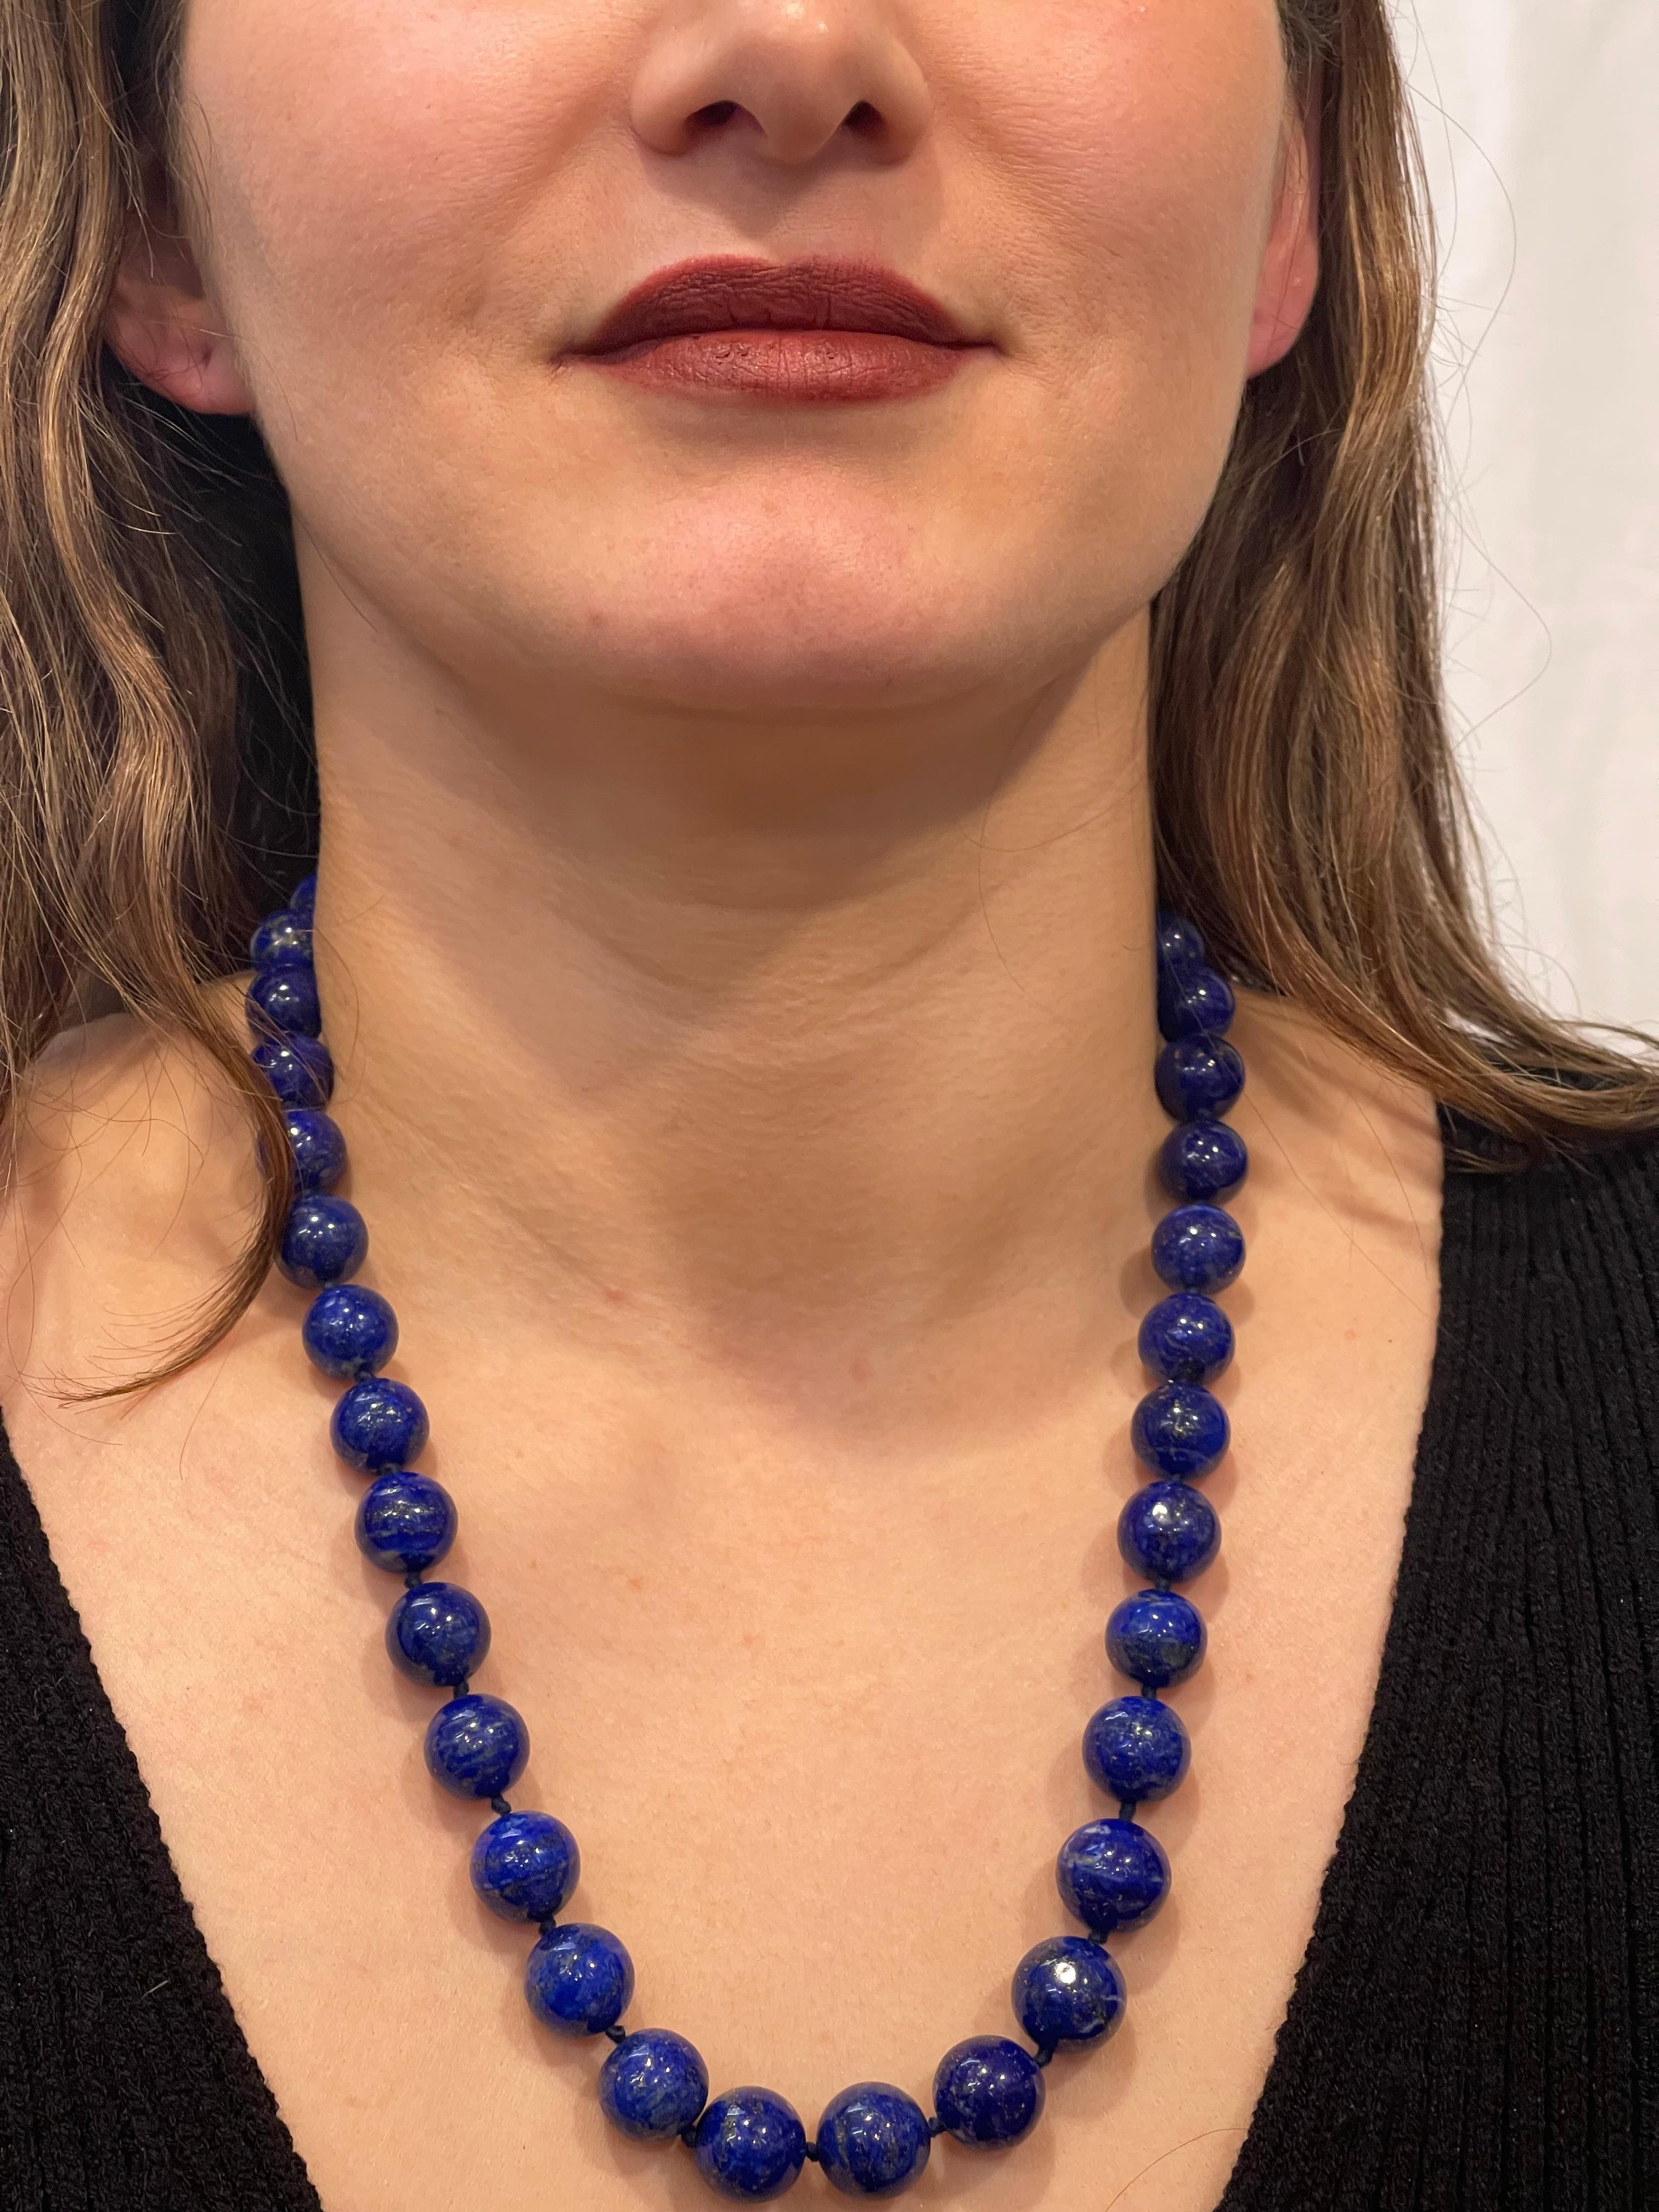 Vintage Lapis Lazuli Single Strand Necklace  with 1.1 Carat Diamond Ball  Clasp in 14 Karat  White Gold
This marvelous vintage Lapis Lazuli  necklace features 1 row of luscious  huge Beads
(measuring approximately from 16 MM to 13 MM)  . It is a